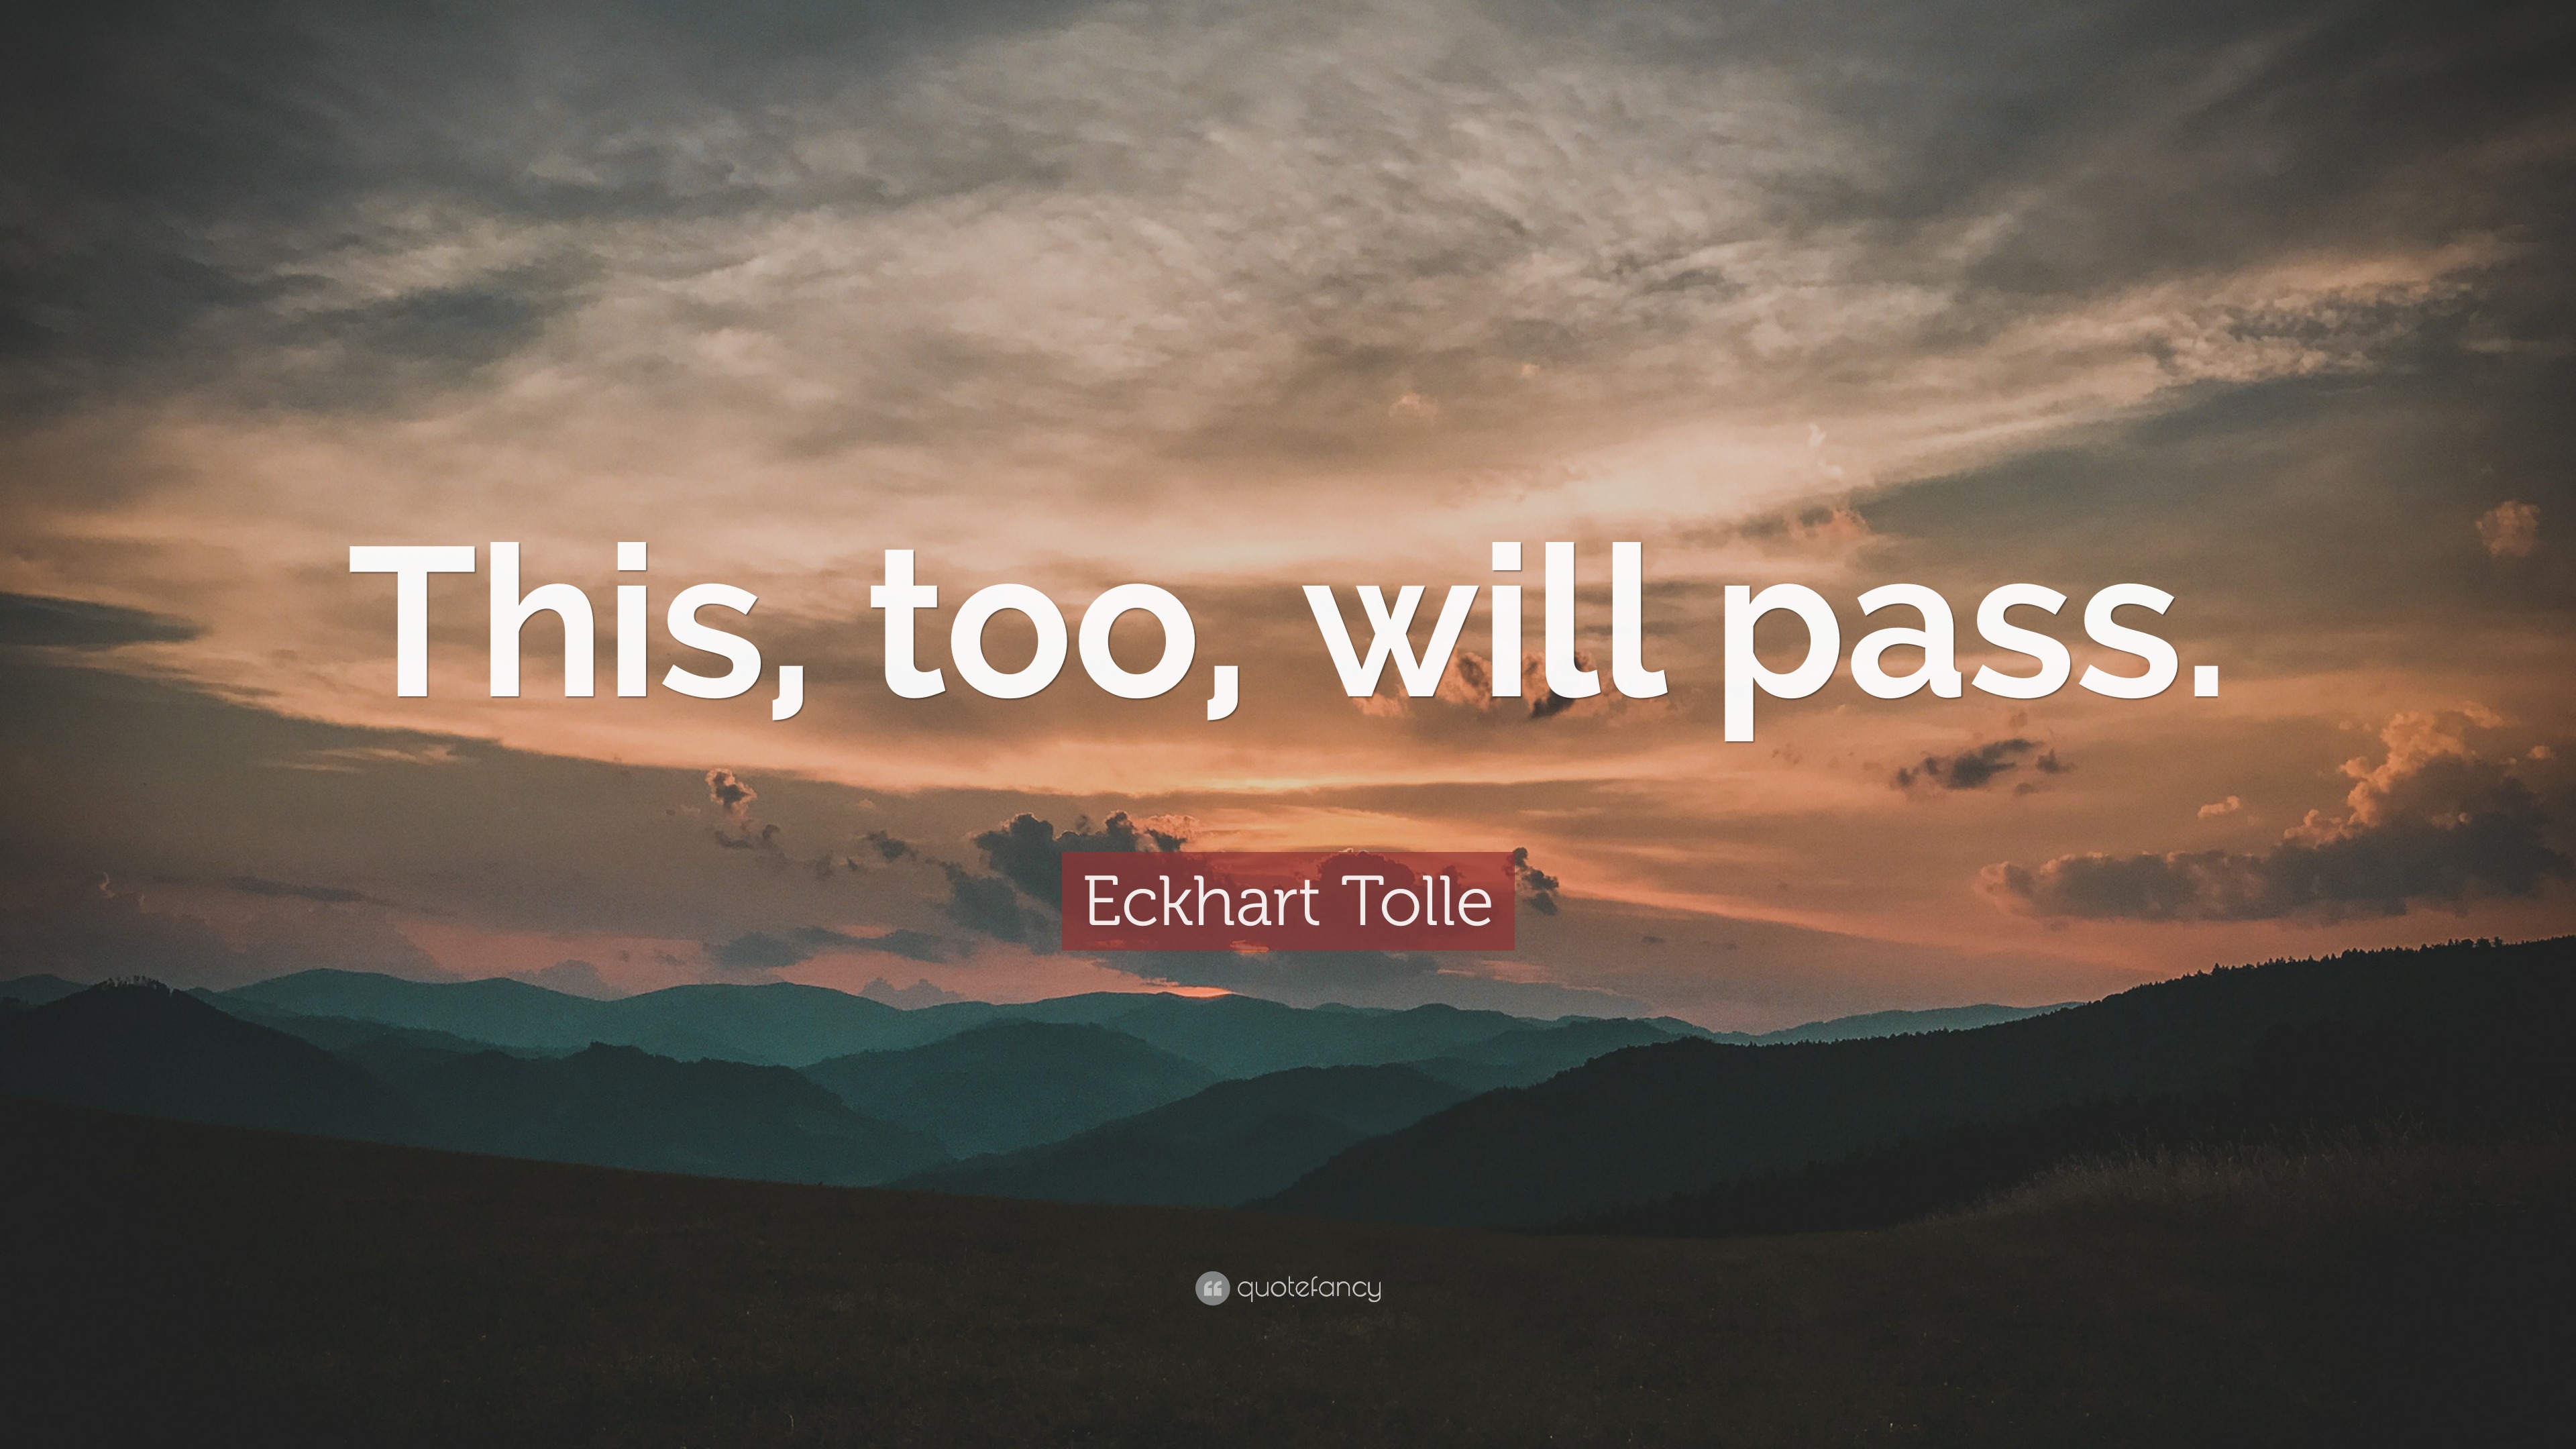 Eckhart Tolle Quote: “This, too, will pass.” (28 wallpapers) - Quotefancy